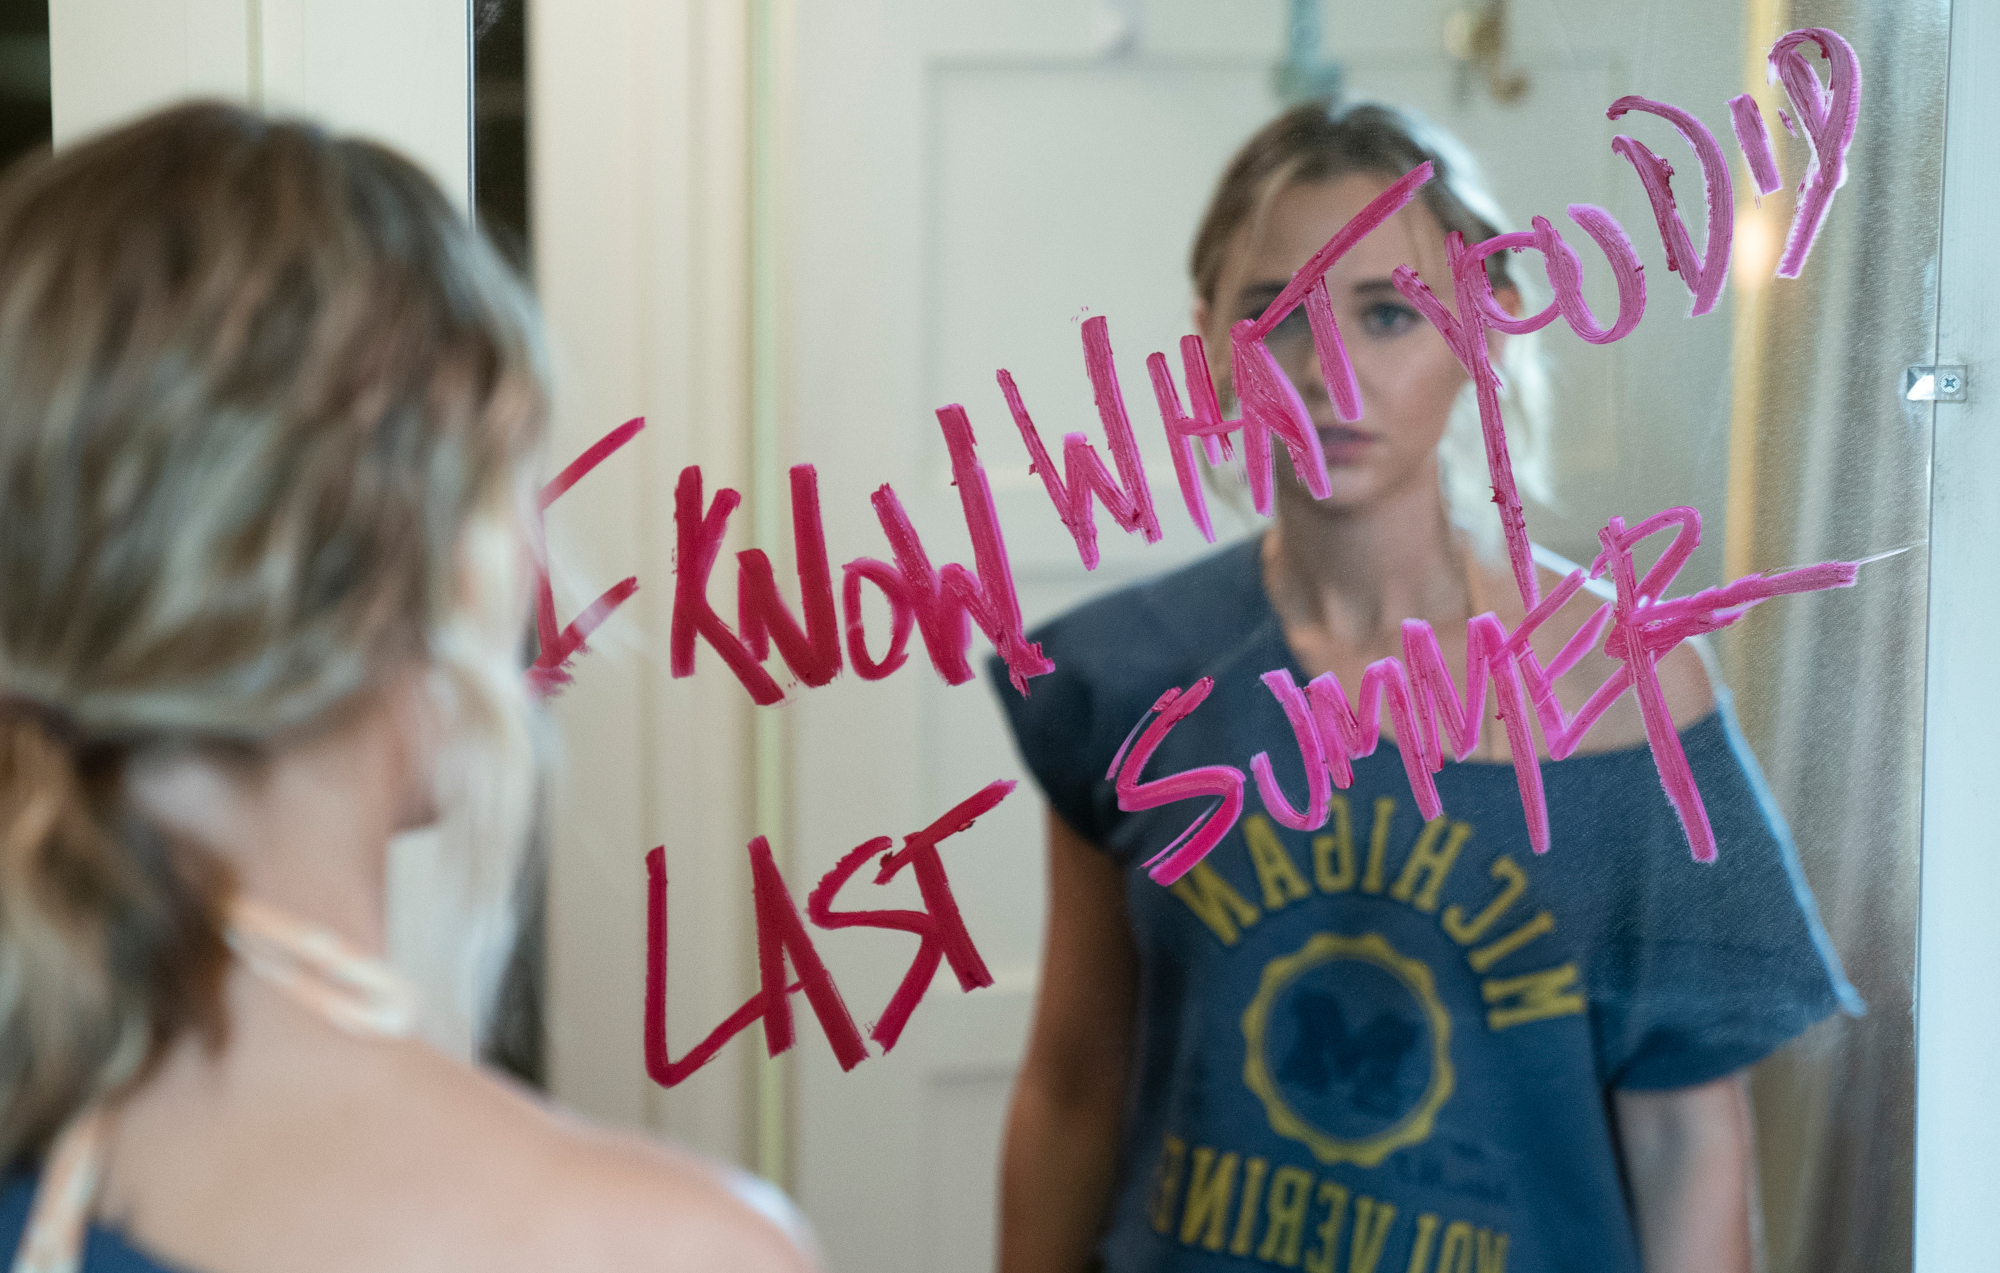 Madison Iseman in Amazon's 'I Know What You Did Last Summer' show, which was canceled at the beginning of 2022. She's standing in front of a mirror, which has 'I know what you did last summer' written on it in pink.